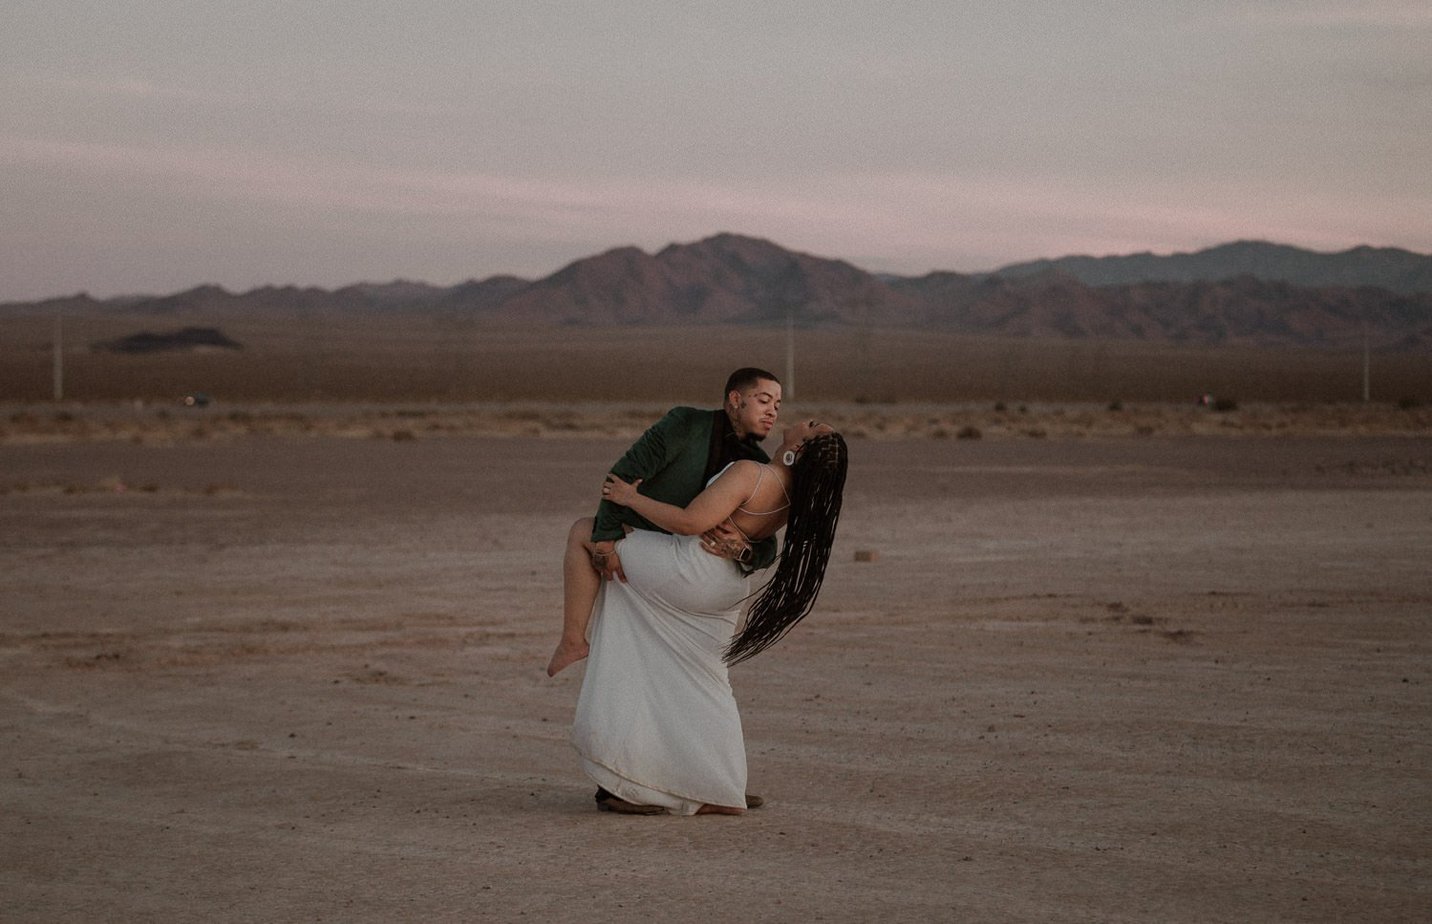 Fun desert elopement by Oregon elopement photographer Black Salt Photography. The mountains look purple behind the couple as the sun sets. Groom dips his bride back and her long hair blows in the wind